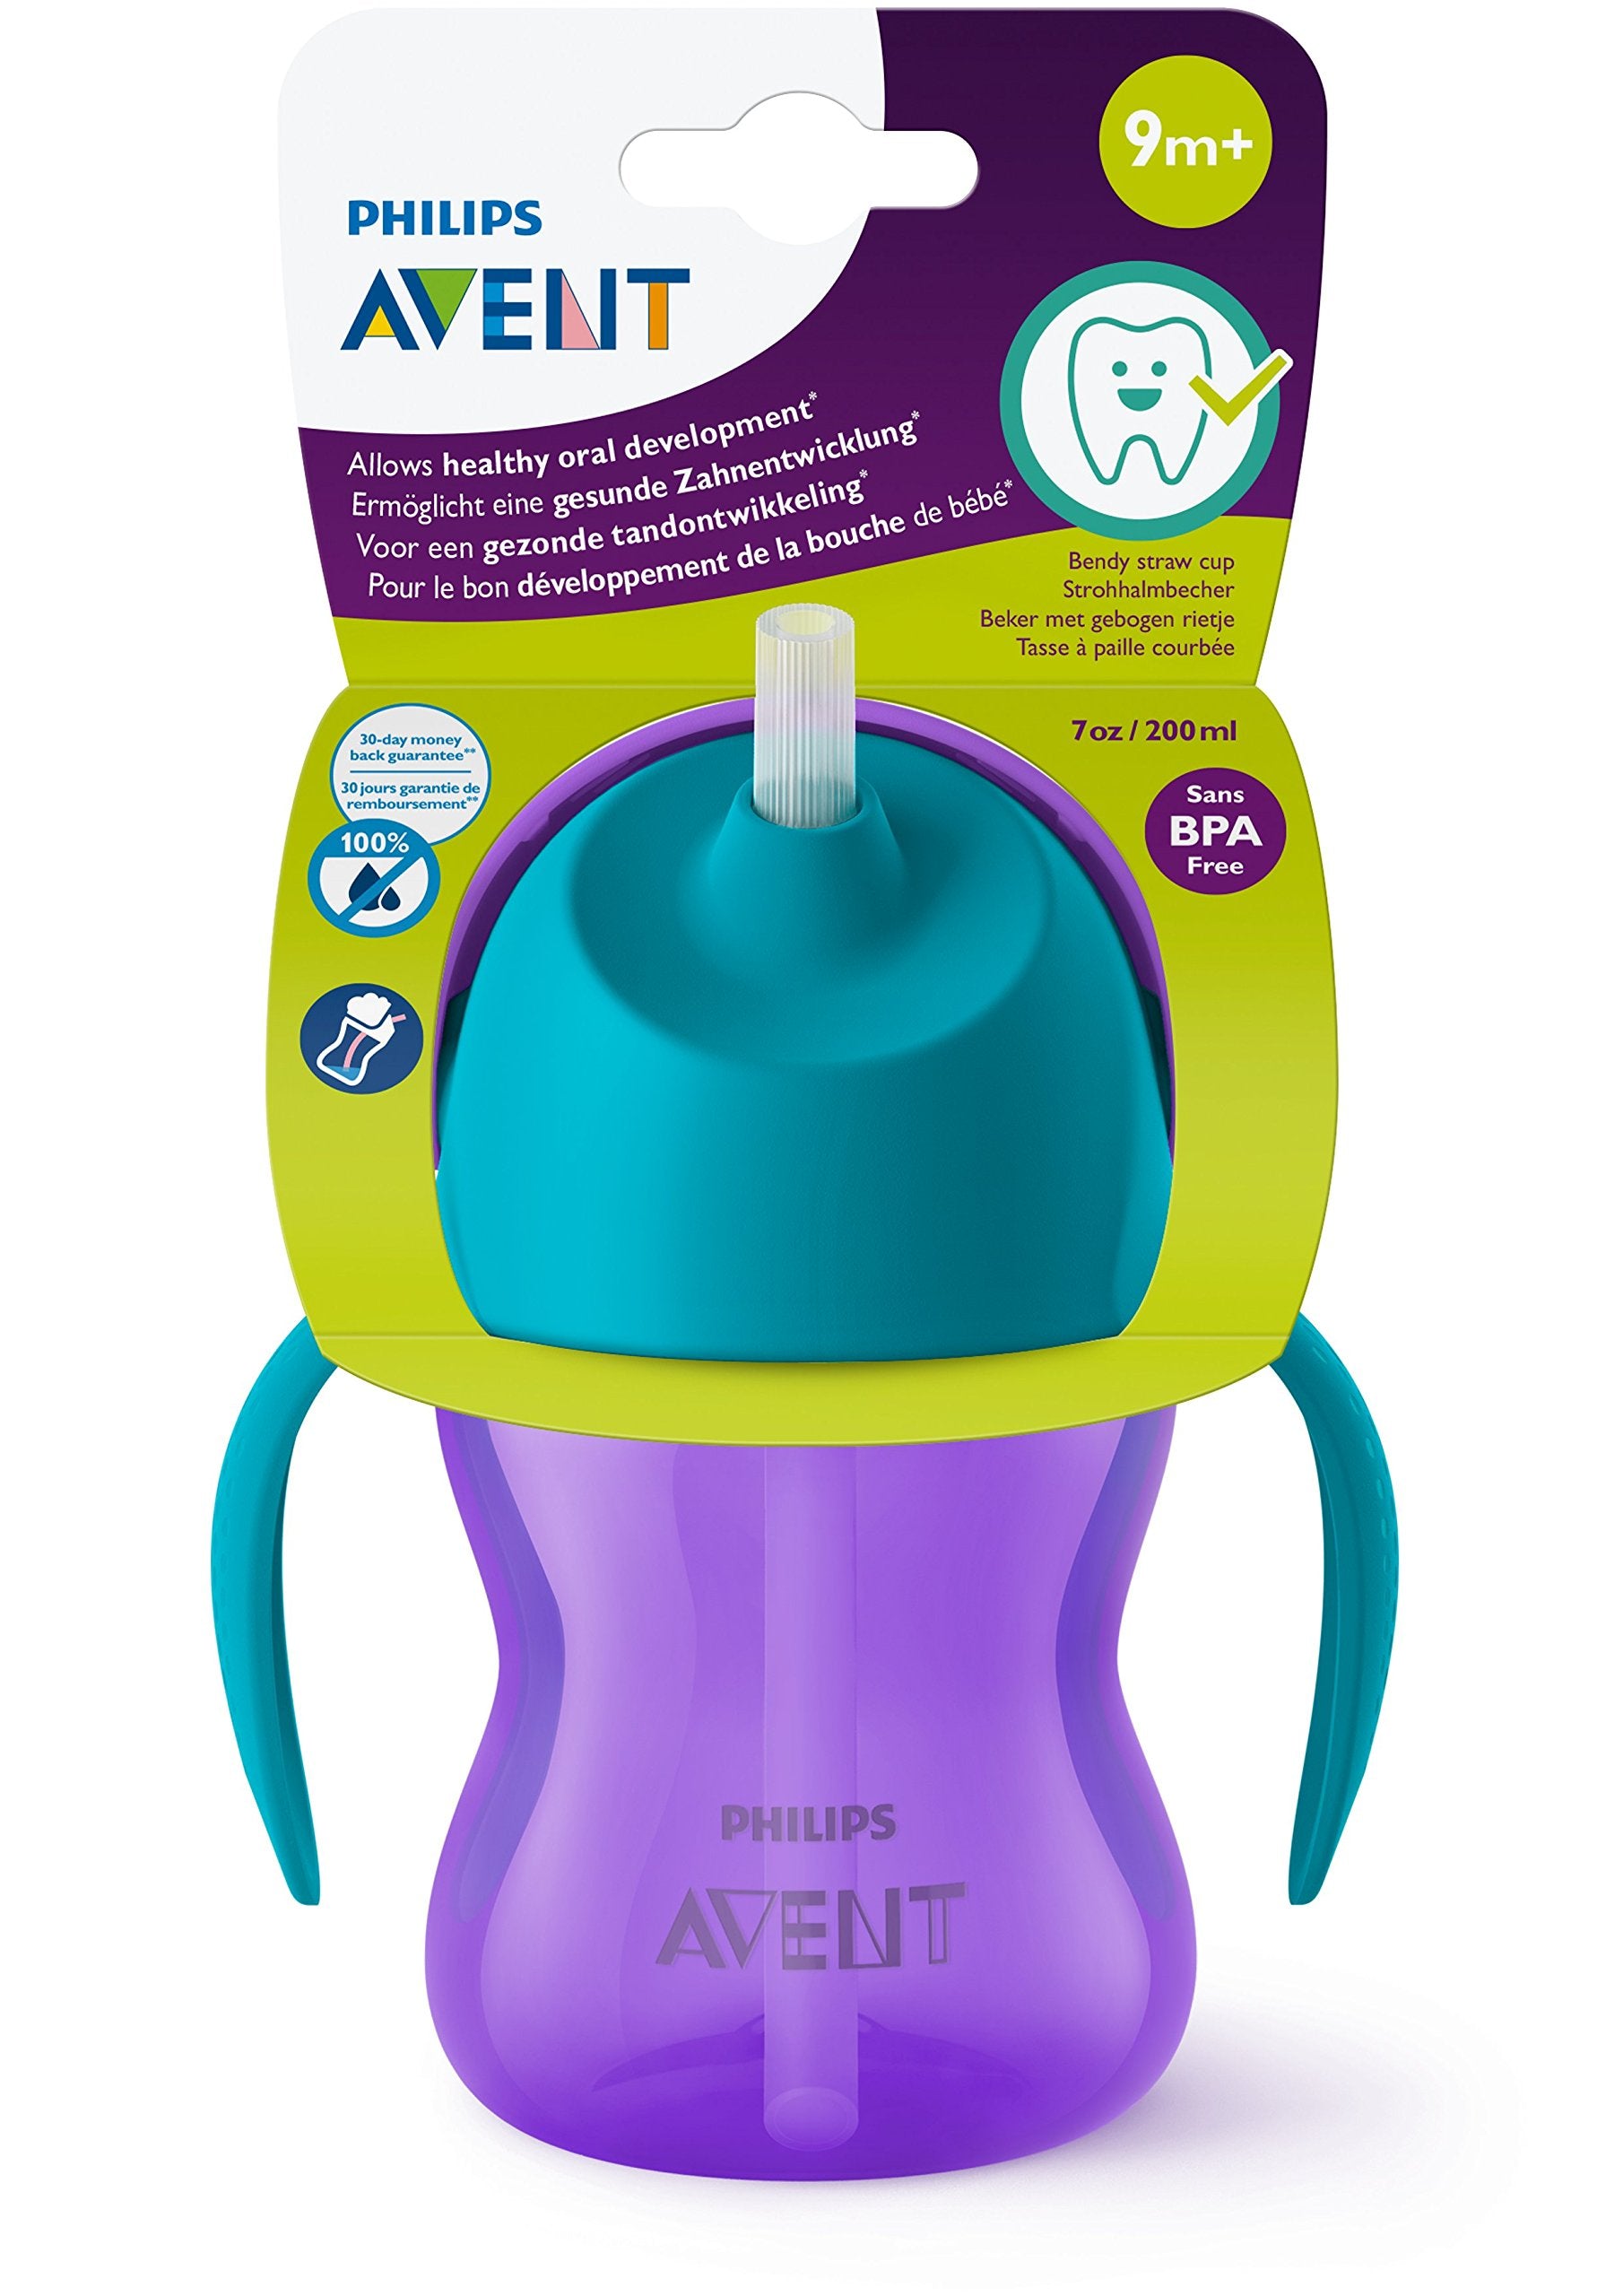 Philips Avent Straw Cup, 7oz (Purple)